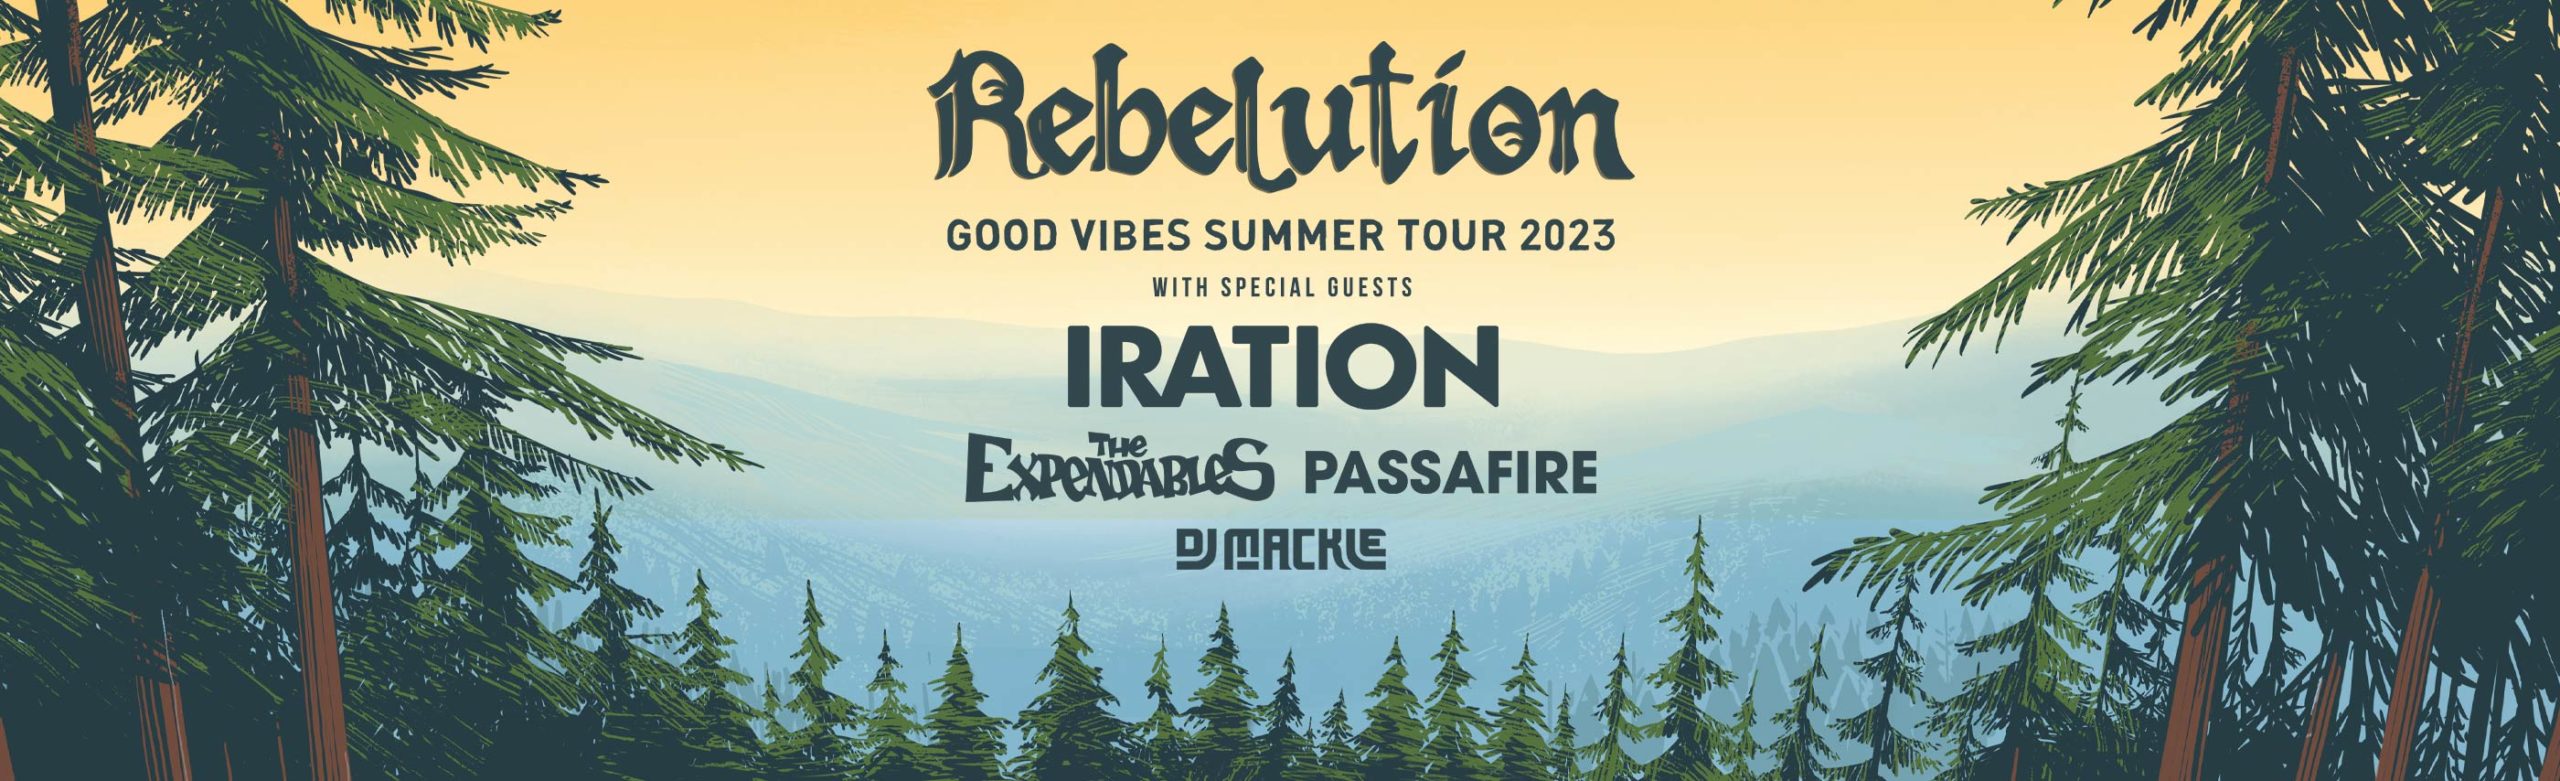 Rebelution Will Return to KettleHouse Amphitheater in 2023 with Iration, The Expendables, Passafire and DJ Mackle Image